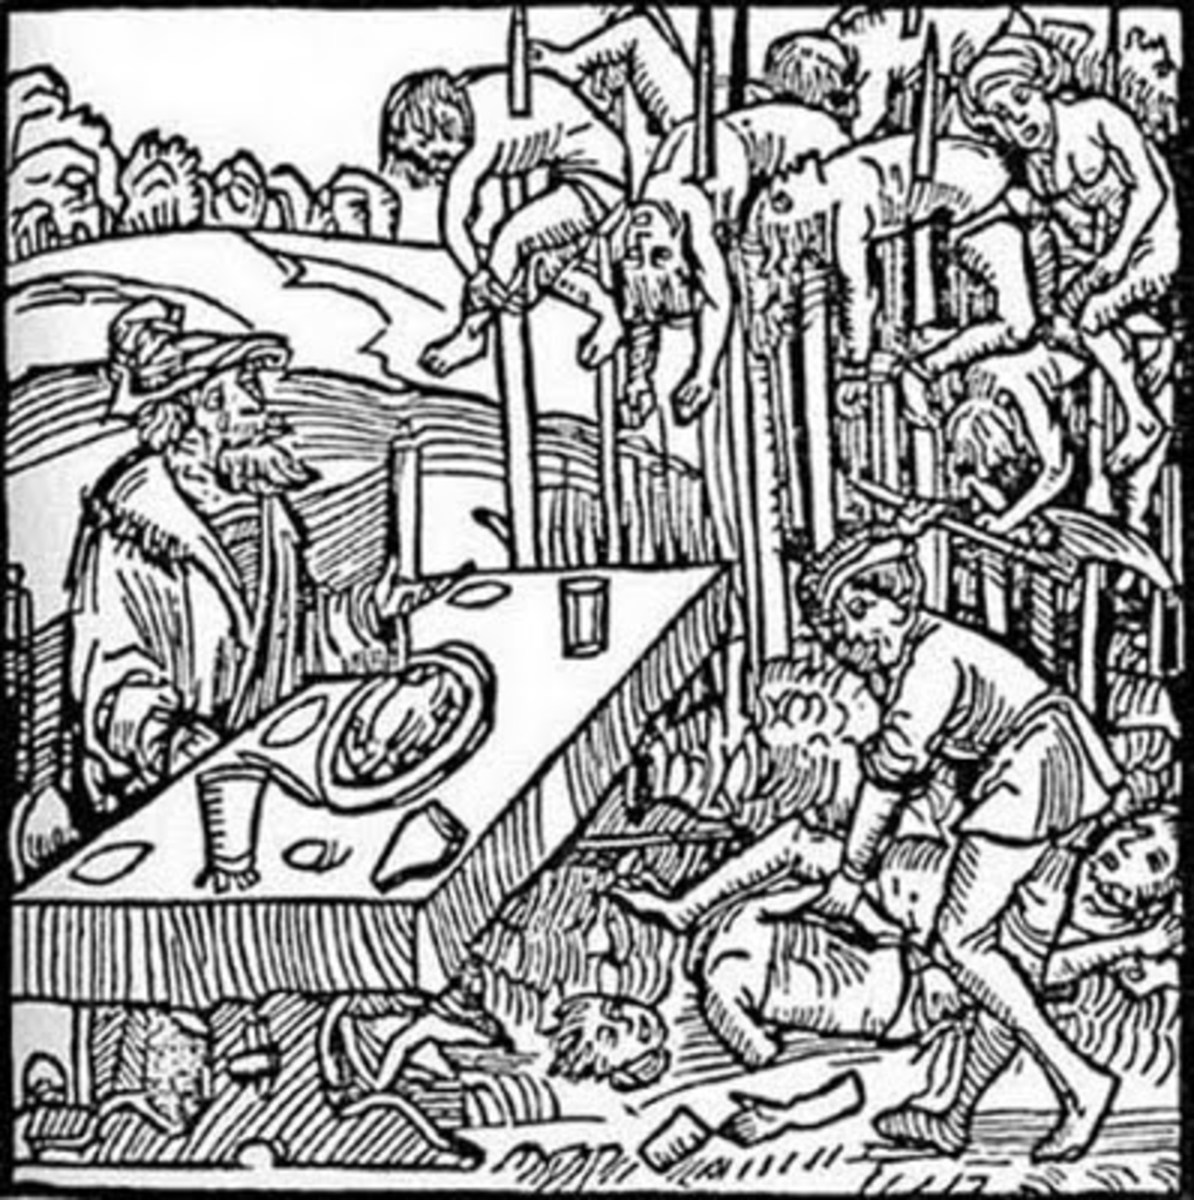 1499 German woodcut showing Vlad III dining among a field of impaled corpses (not fact)